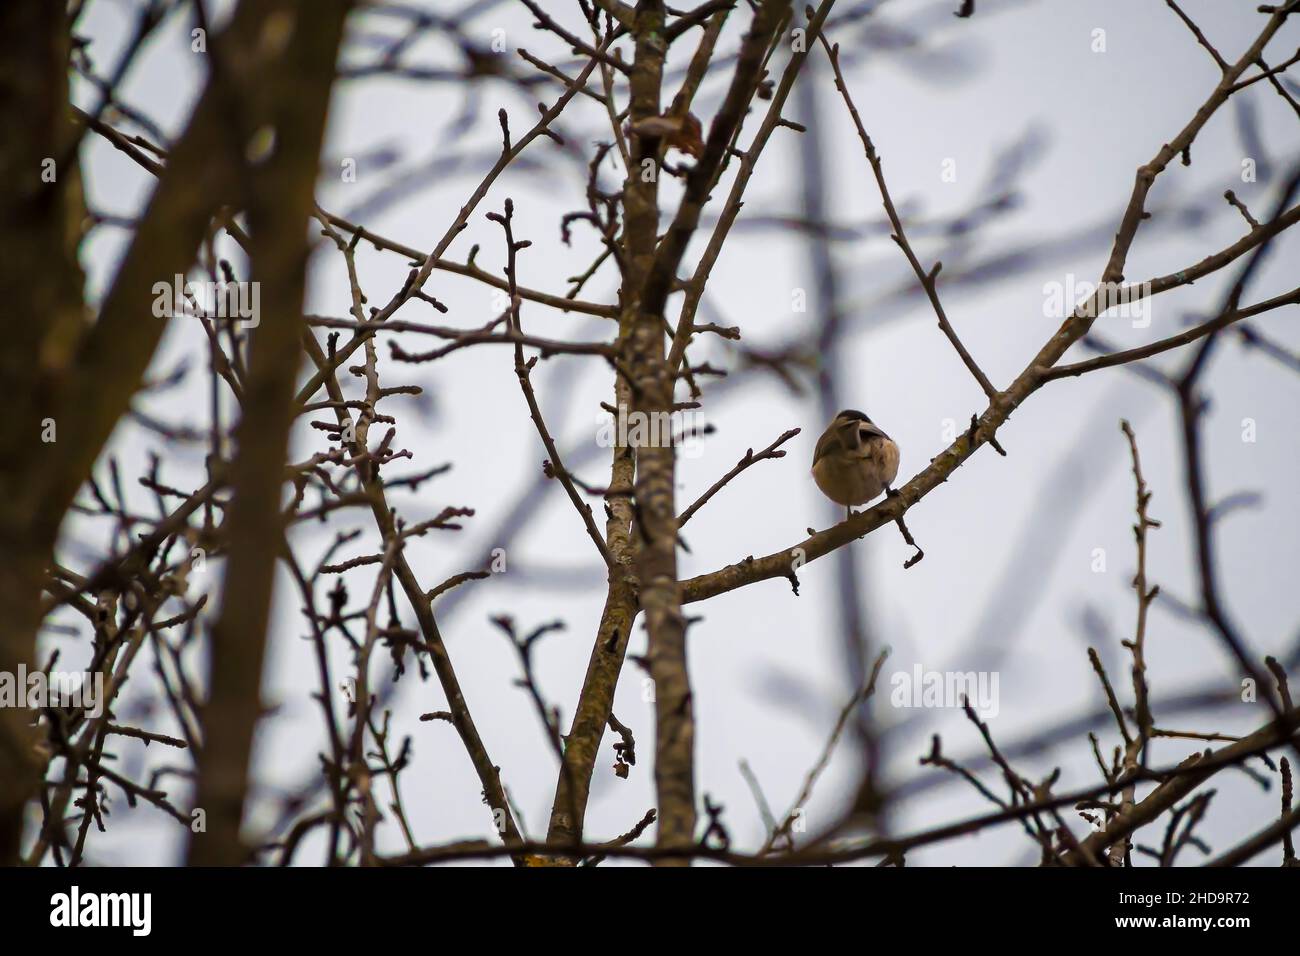 Closeup shot of a tiny Parus Palustris bird sitting on a thin withered branch Stock Photo